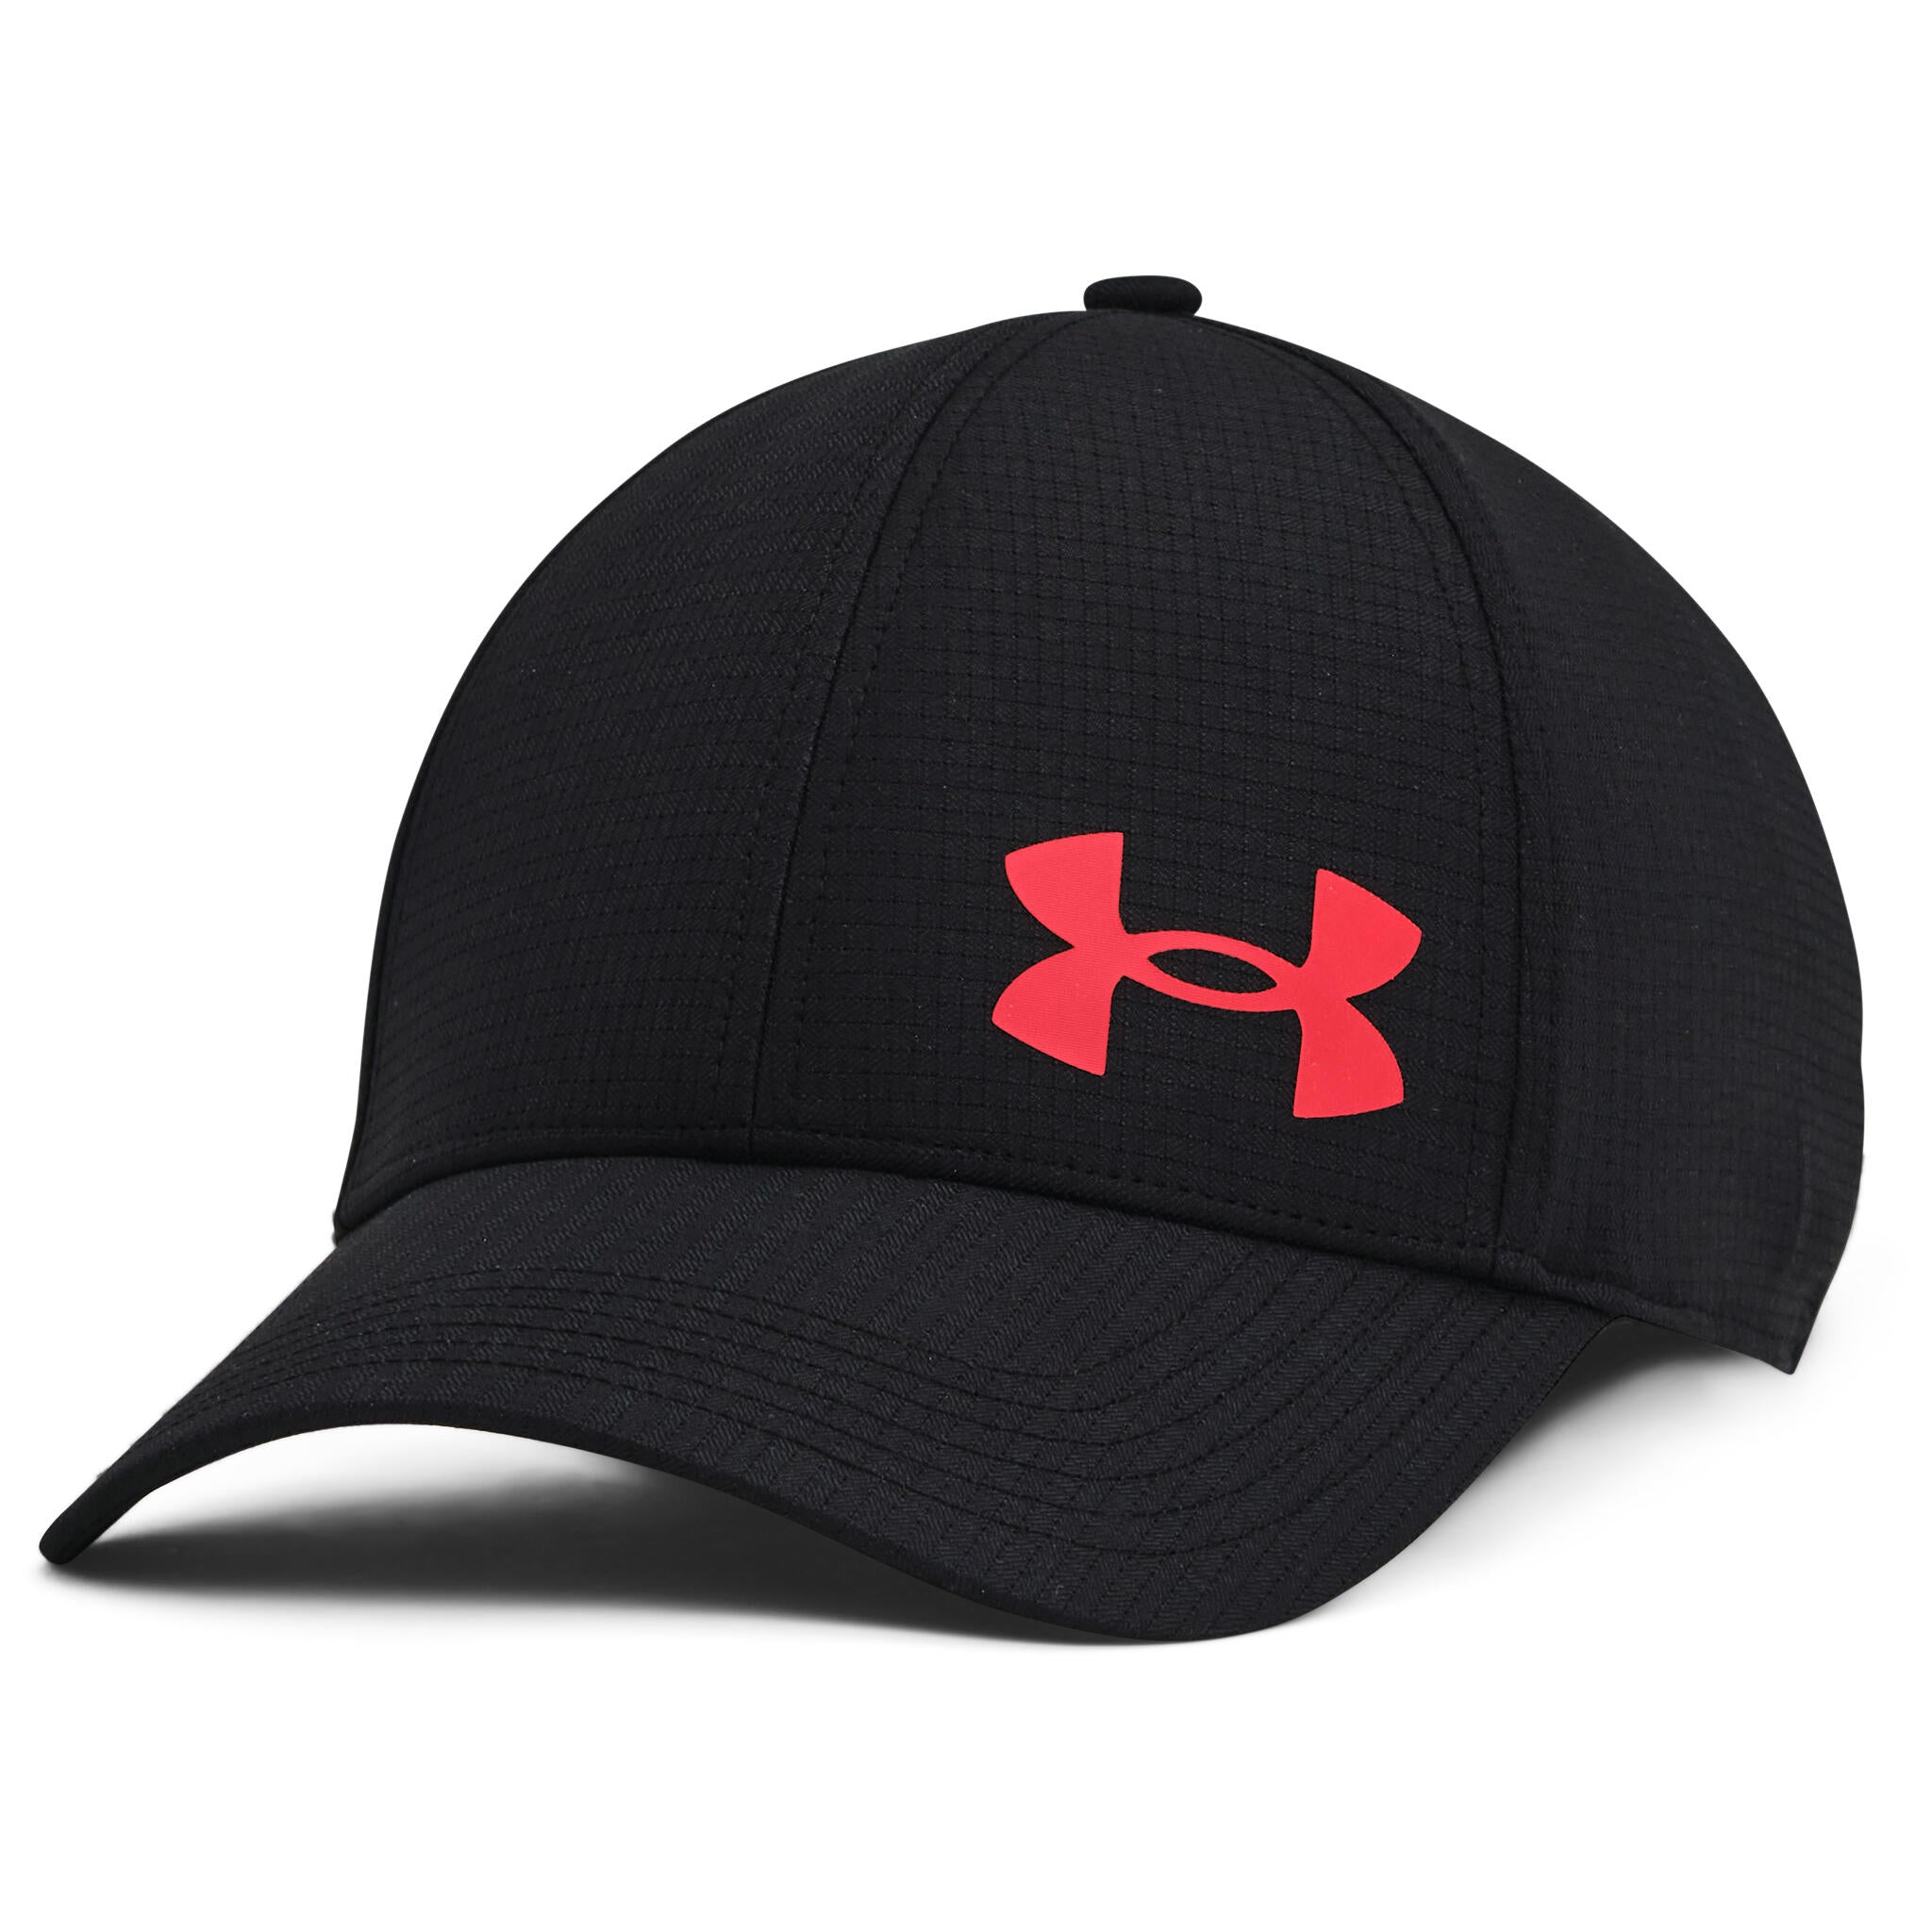 Under Armour Men's Iso-Chill ArmourVent Stretch Hat